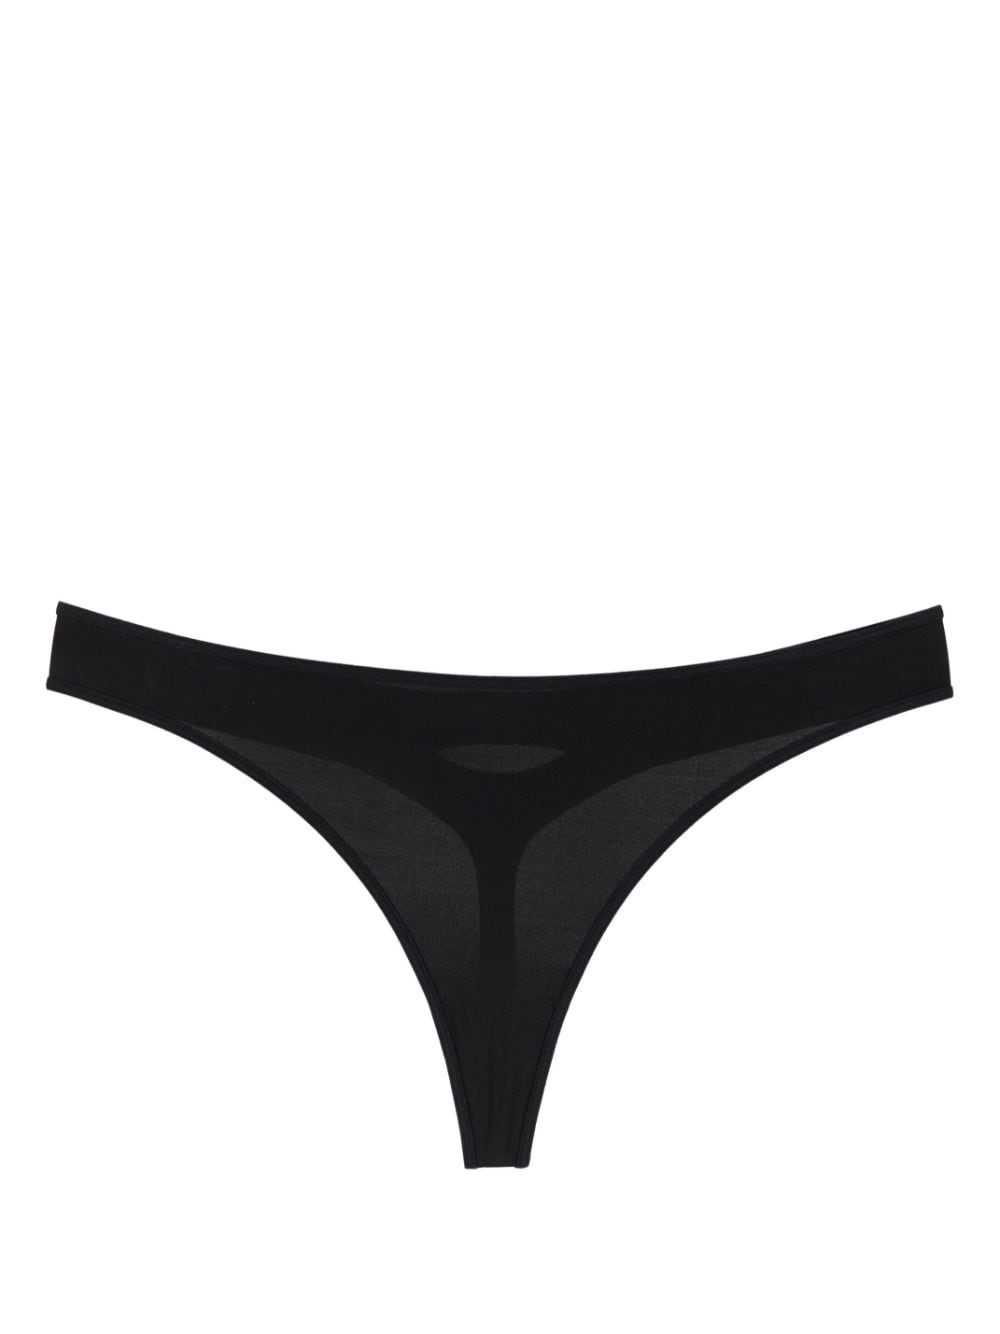 Image 1 of Marlies Dekkers Velocity cut-out thong